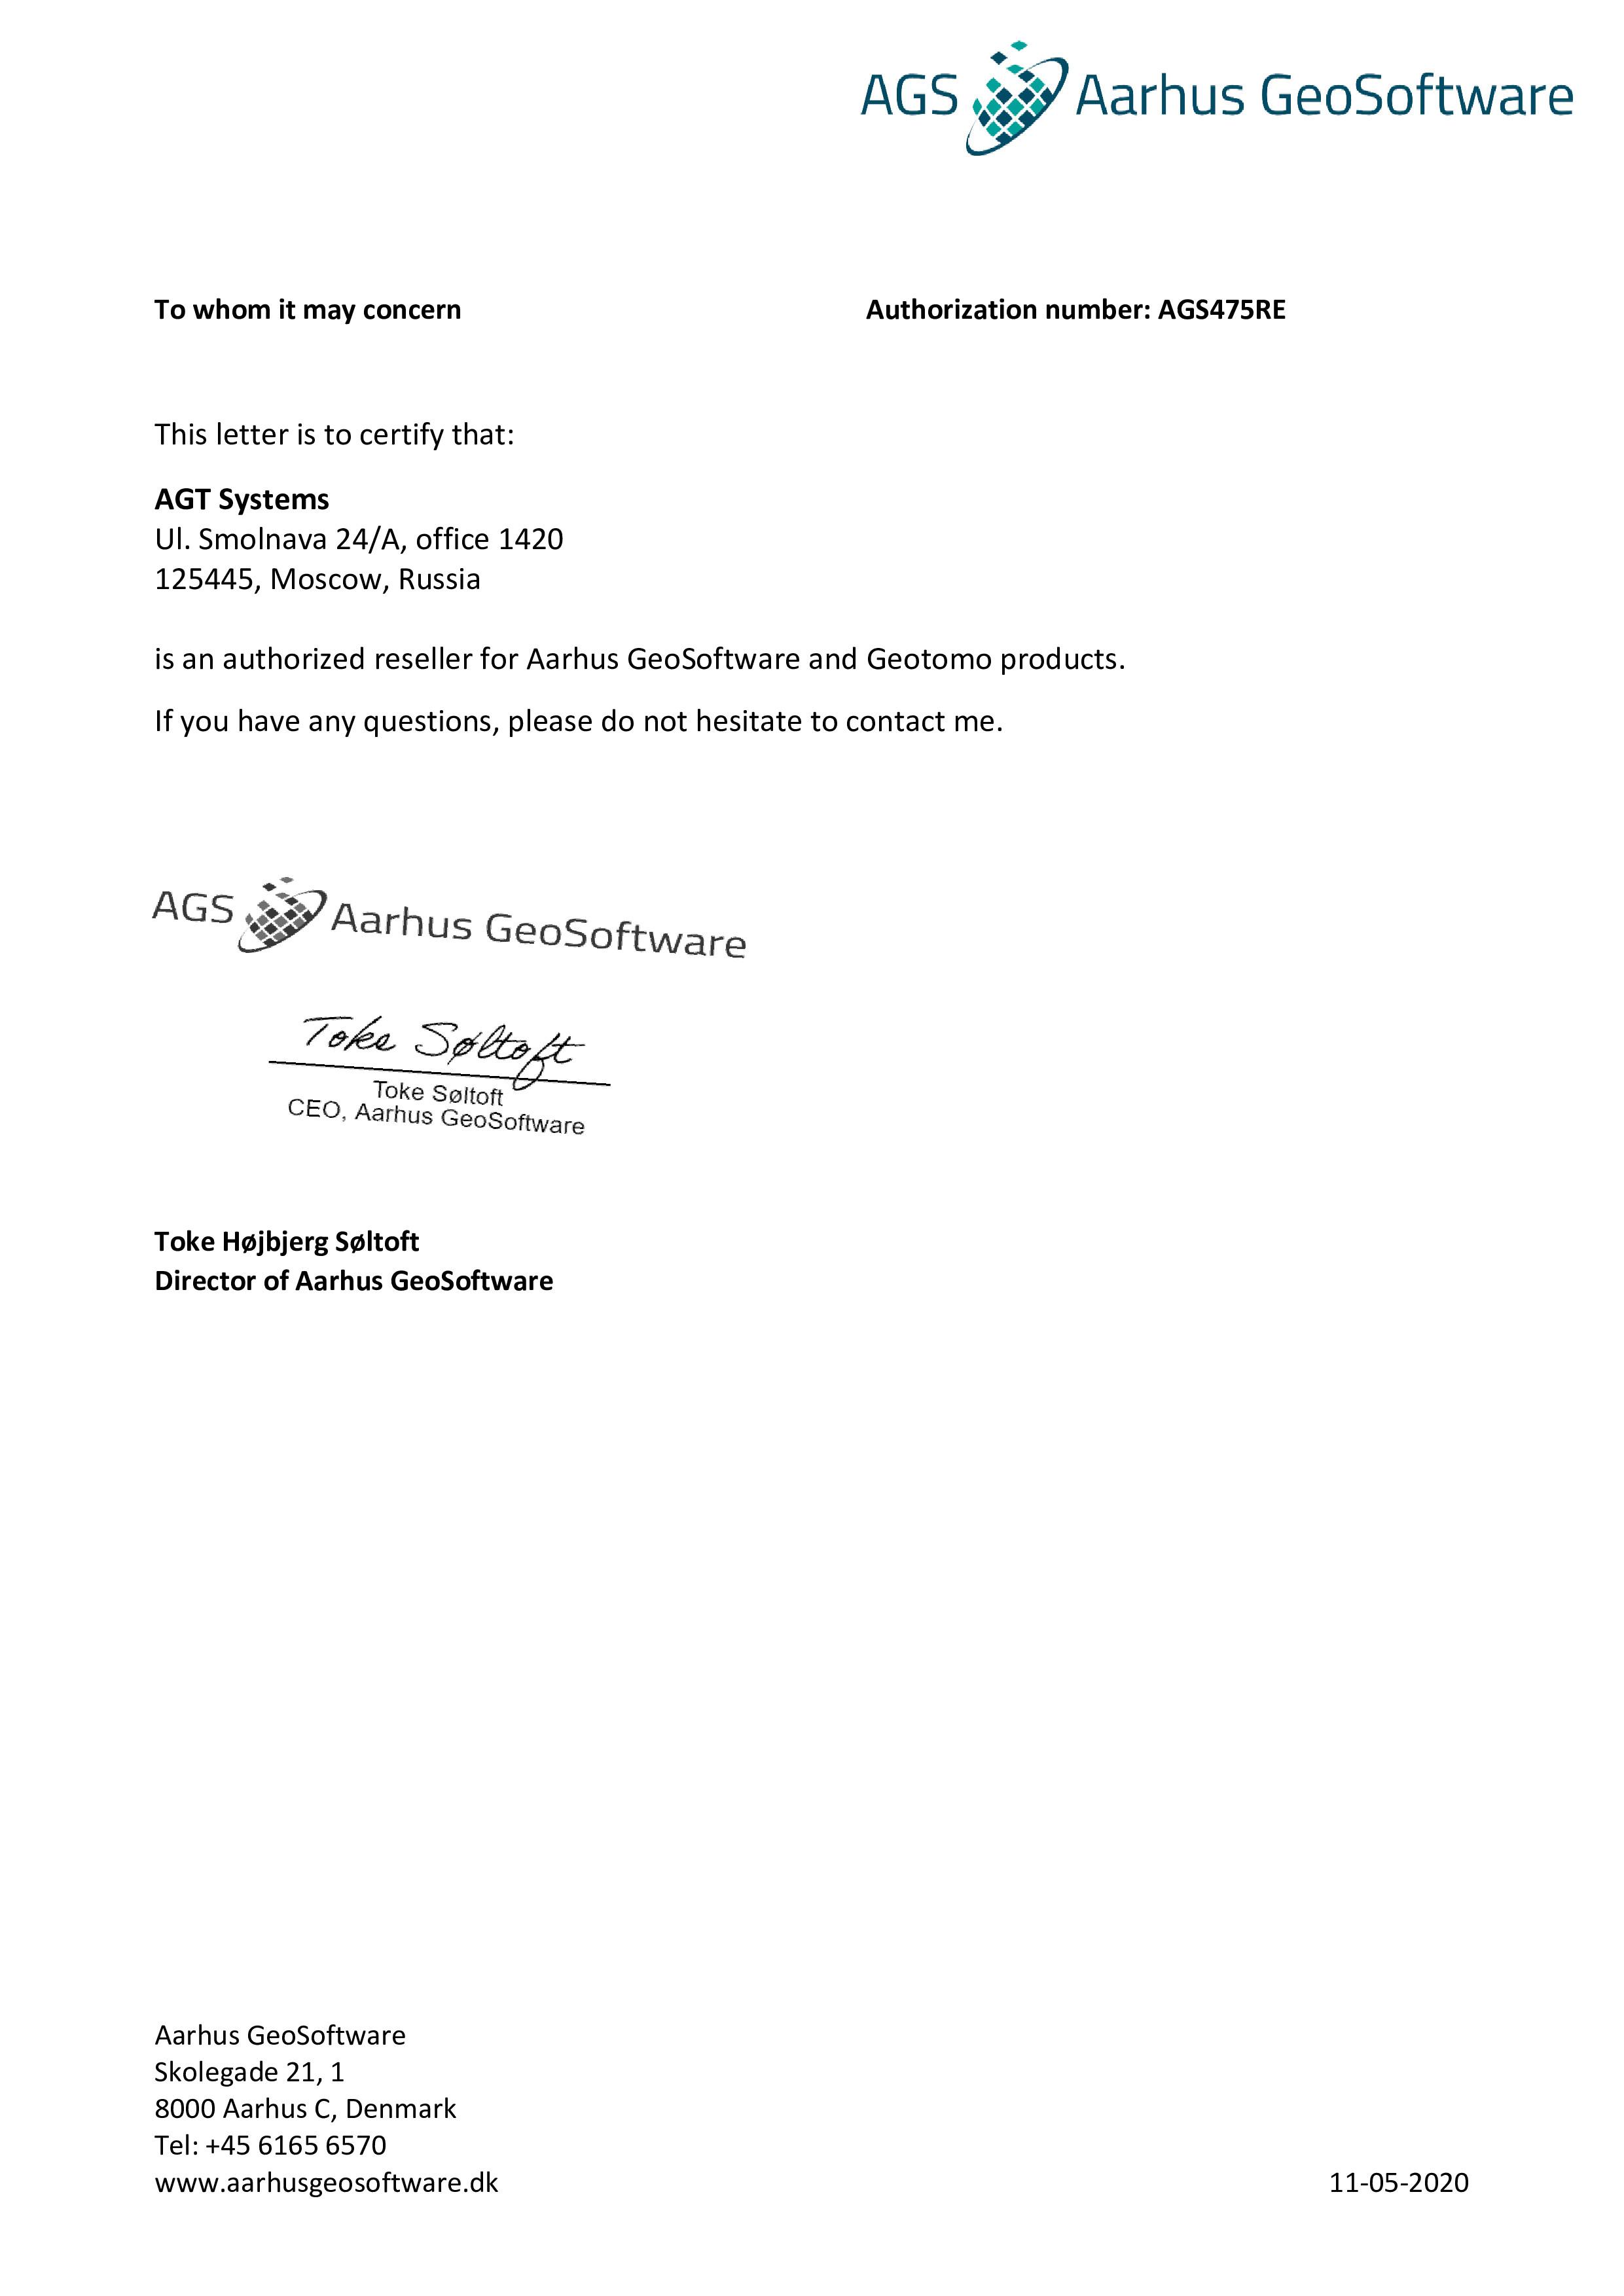 Letter of Authorization with Aarhus